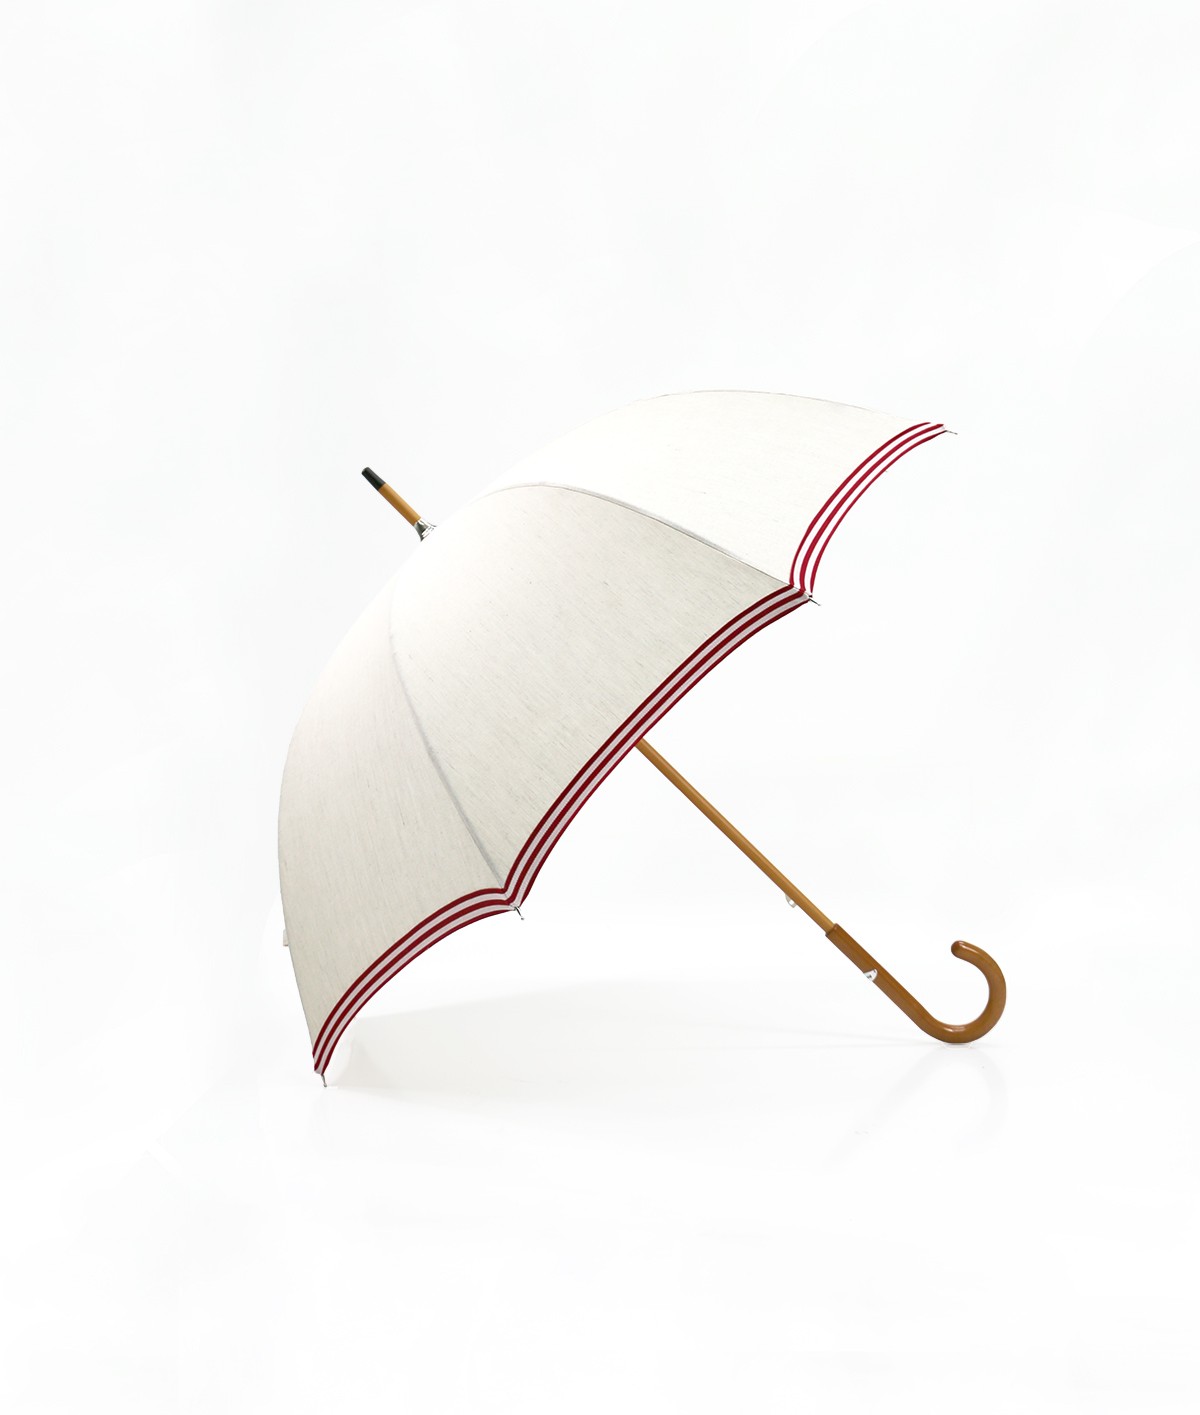 → Linen Umbrella-Parasol "The Stripes" - Red Handcrafted in France by the Umbrellas Manufacturer Maison Pierre Vaux